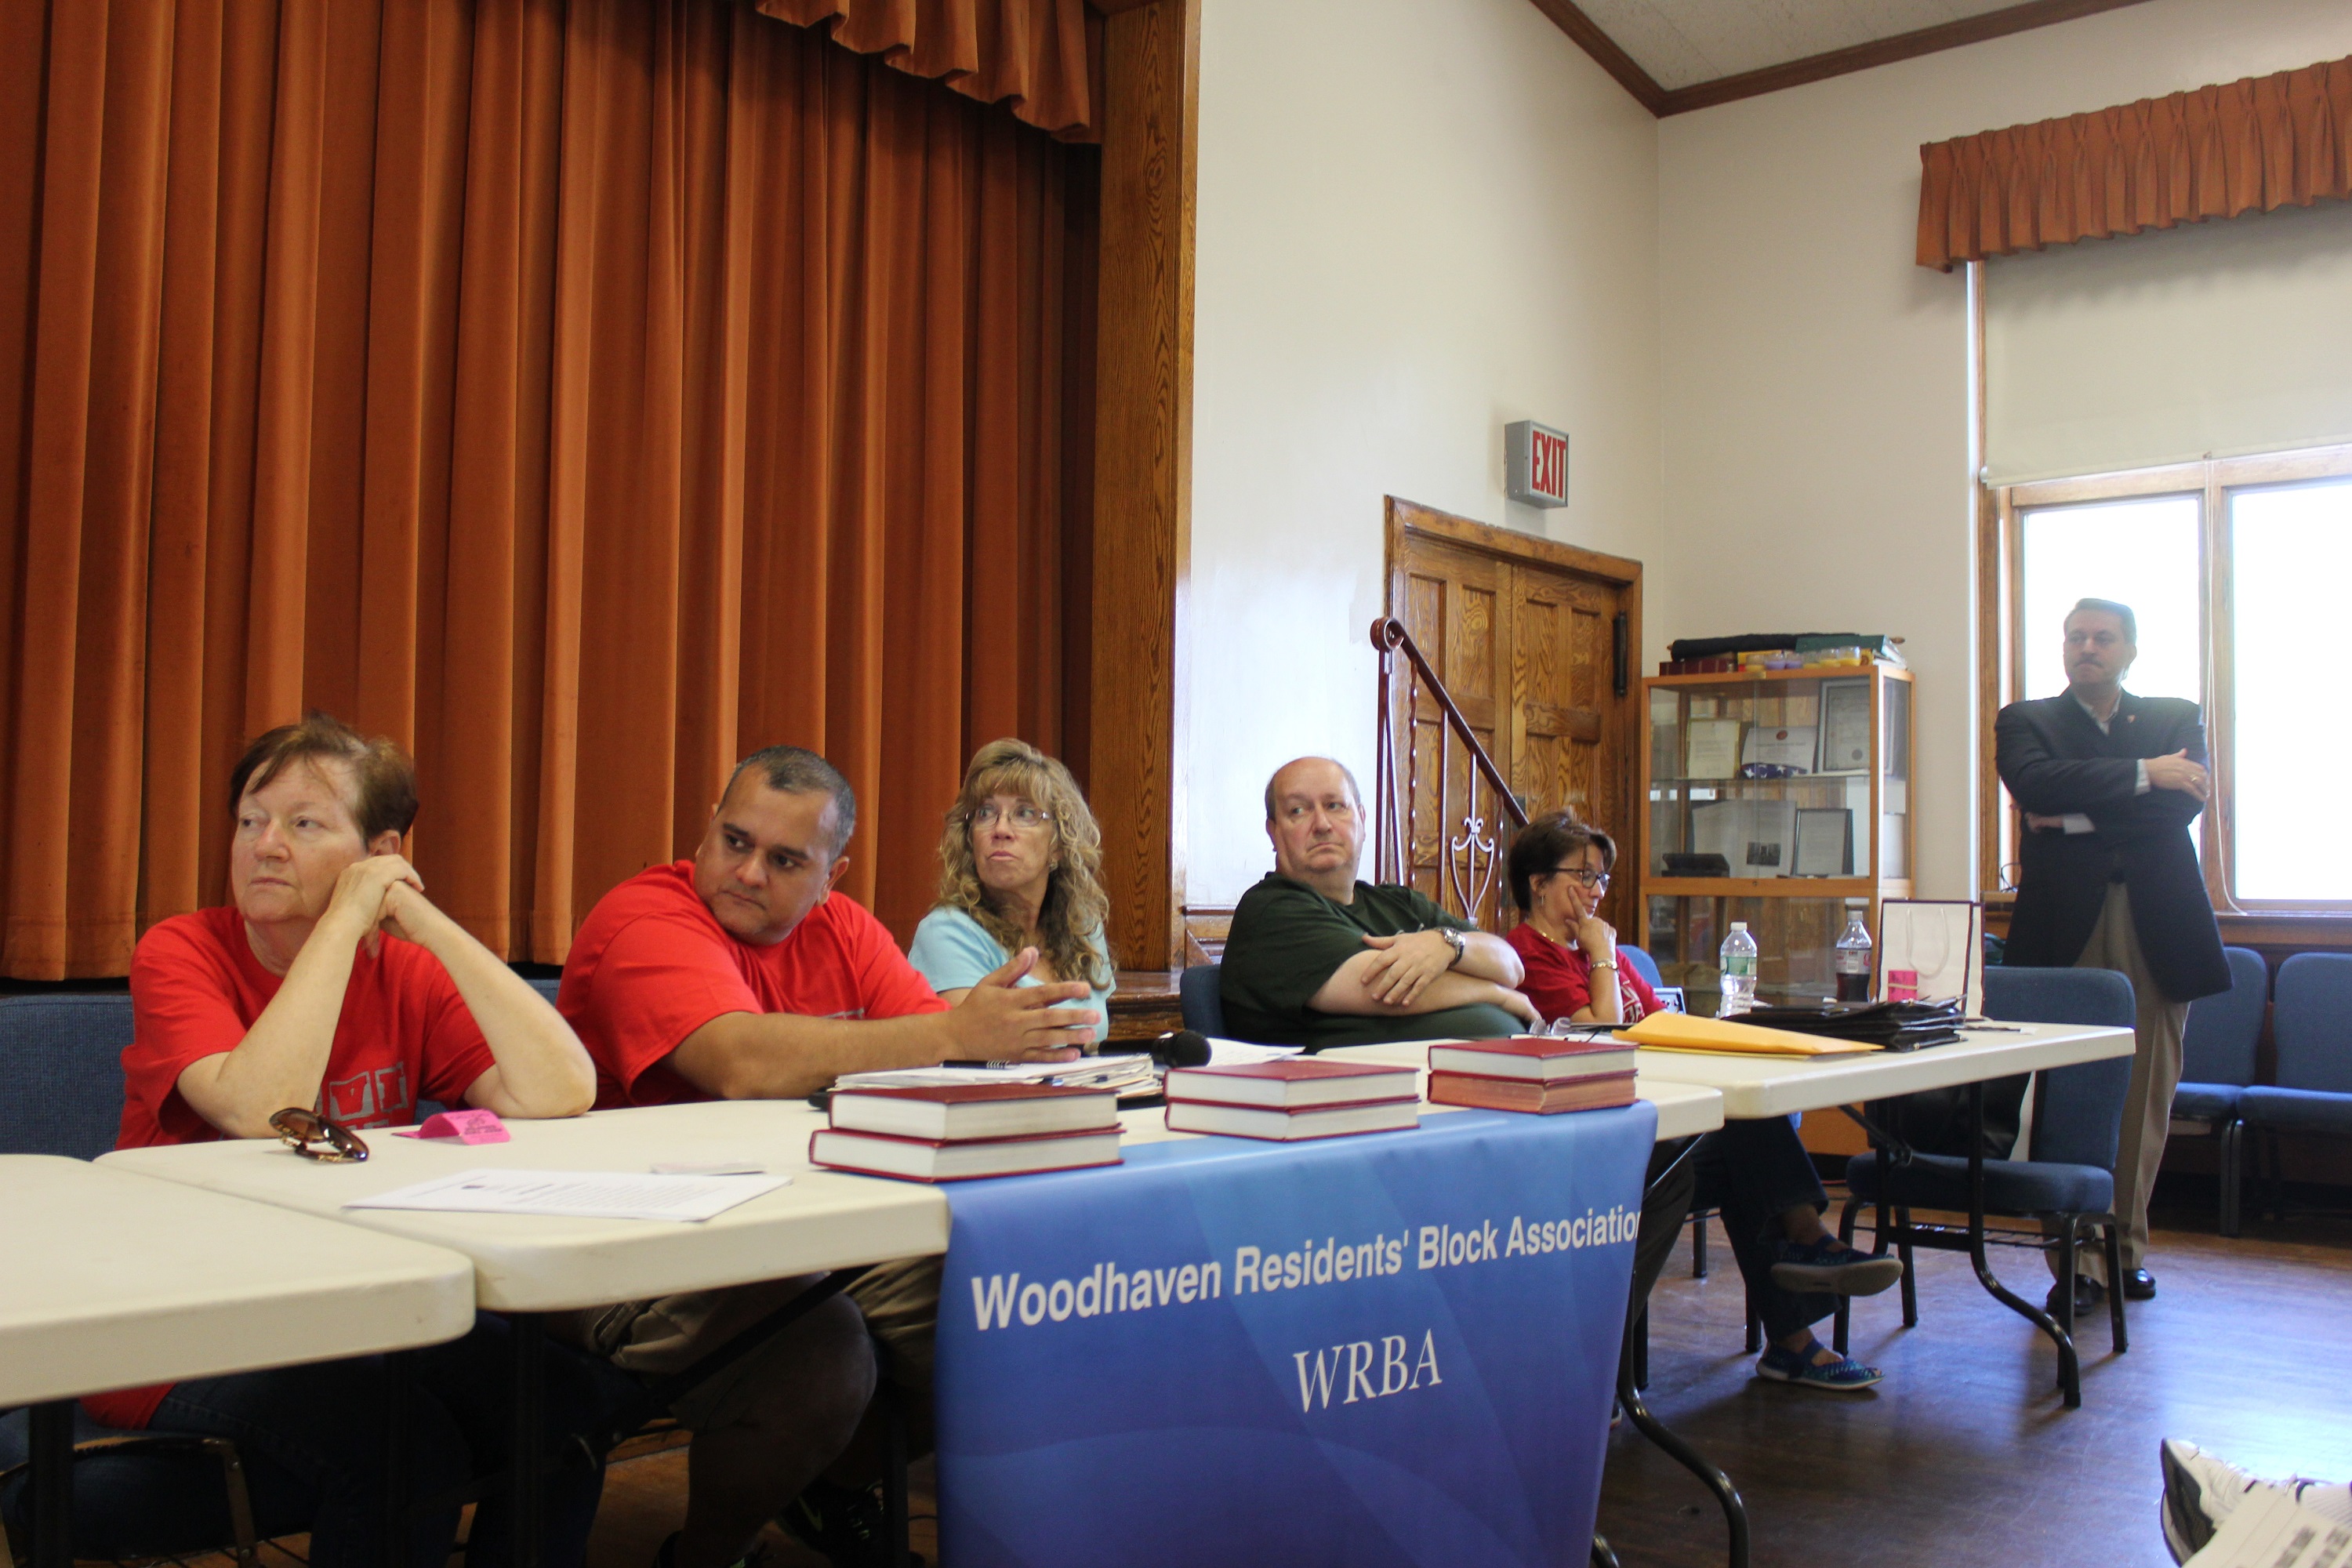 State Senator Joseph Addabbo (far right) joined members of the Woodhaven Residents Block Association (WRBA) to discuss Select Bus Service at their monthly town hall meeting on Saturday